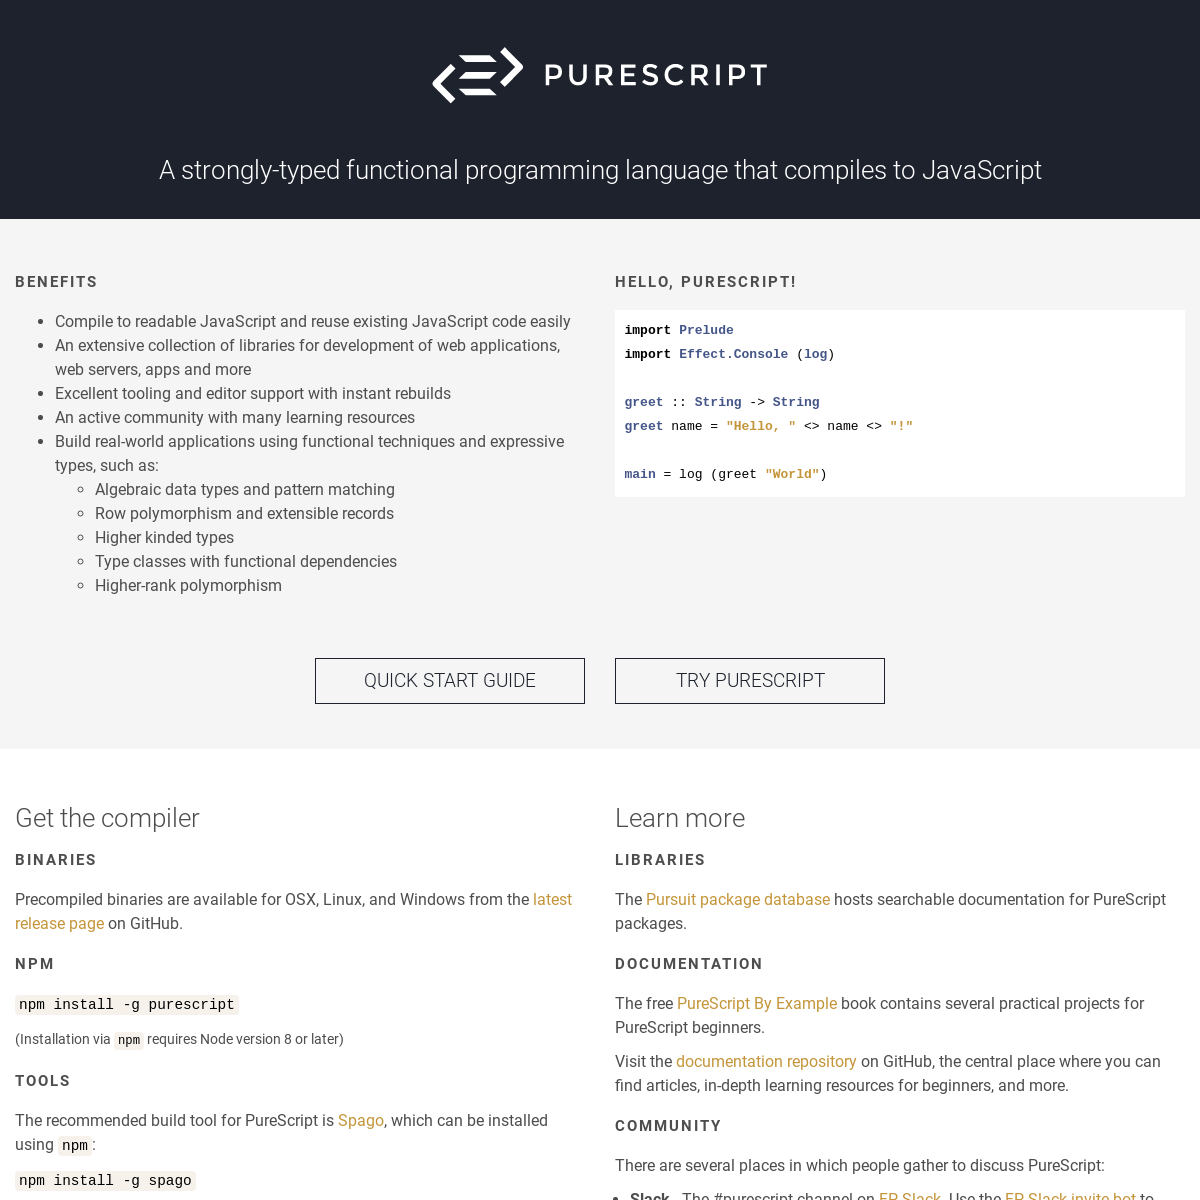 A complete backup of purescript.org